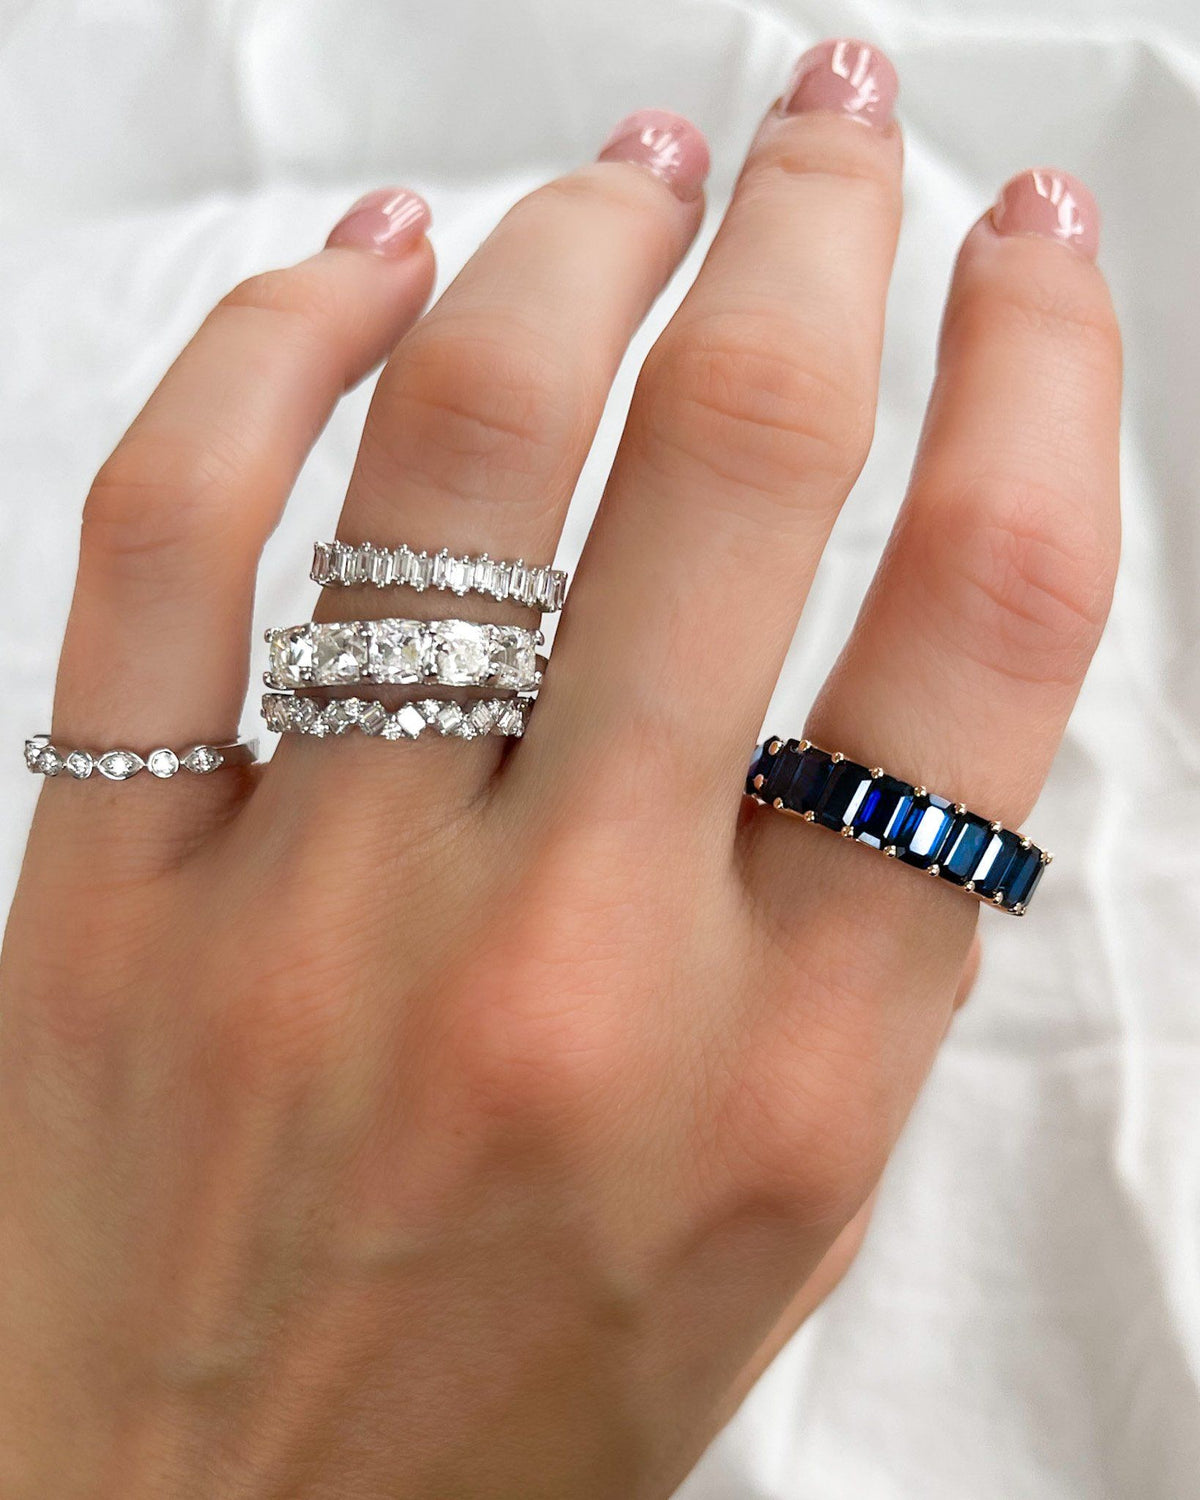 Scalloped Diamond Stacker Rings by Good Stone available in Gold and Platinum